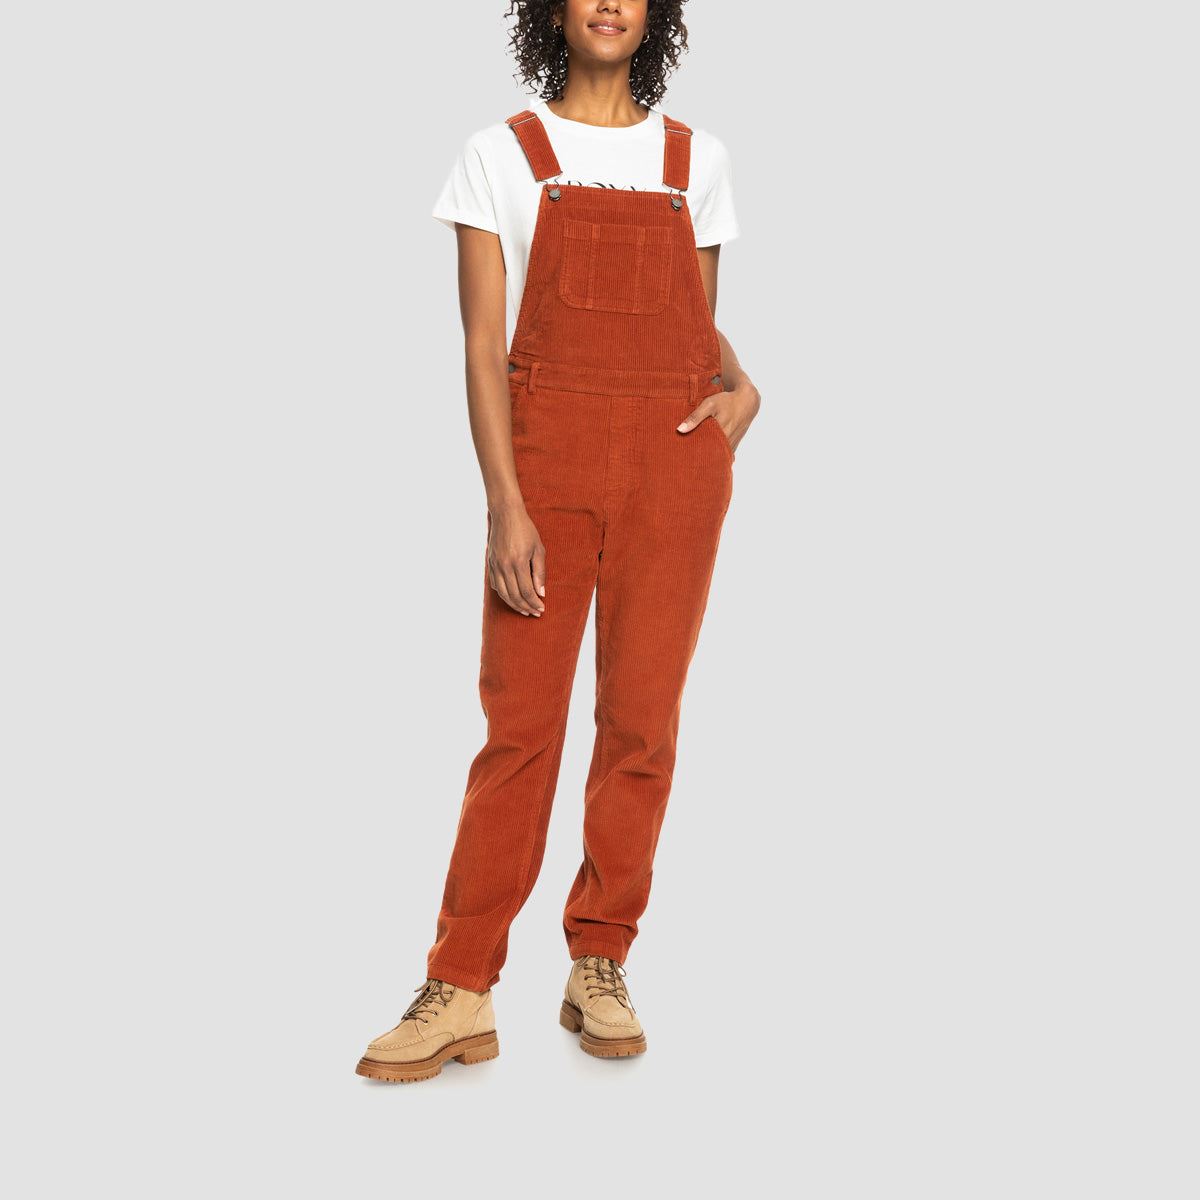 Roxy Jungle Sound Dungarees Baked Clay - Womens